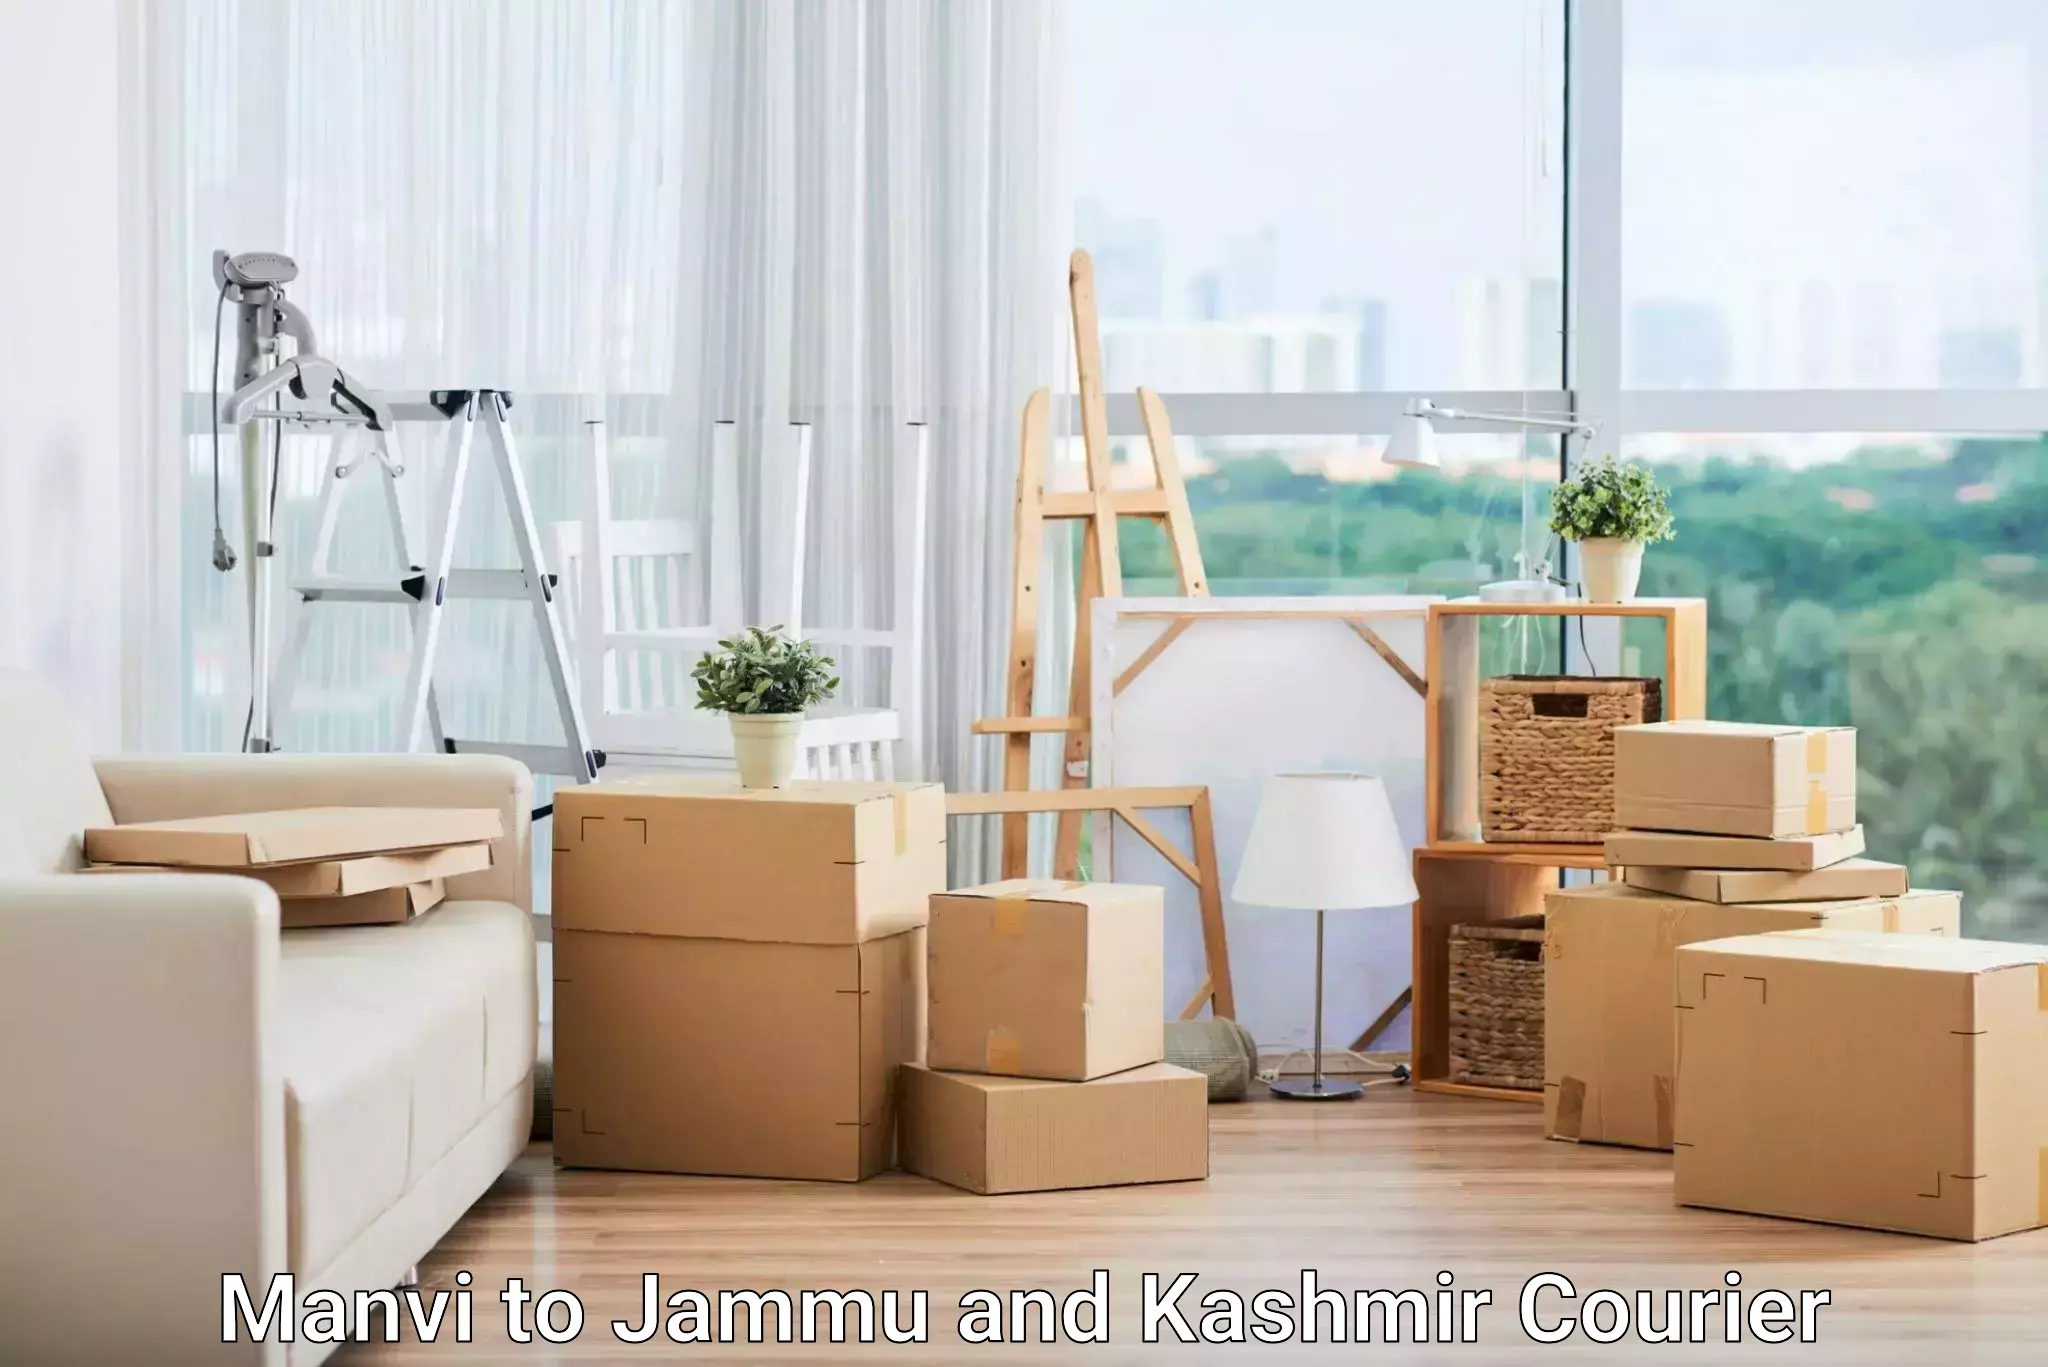 Courier service booking Manvi to Jammu and Kashmir